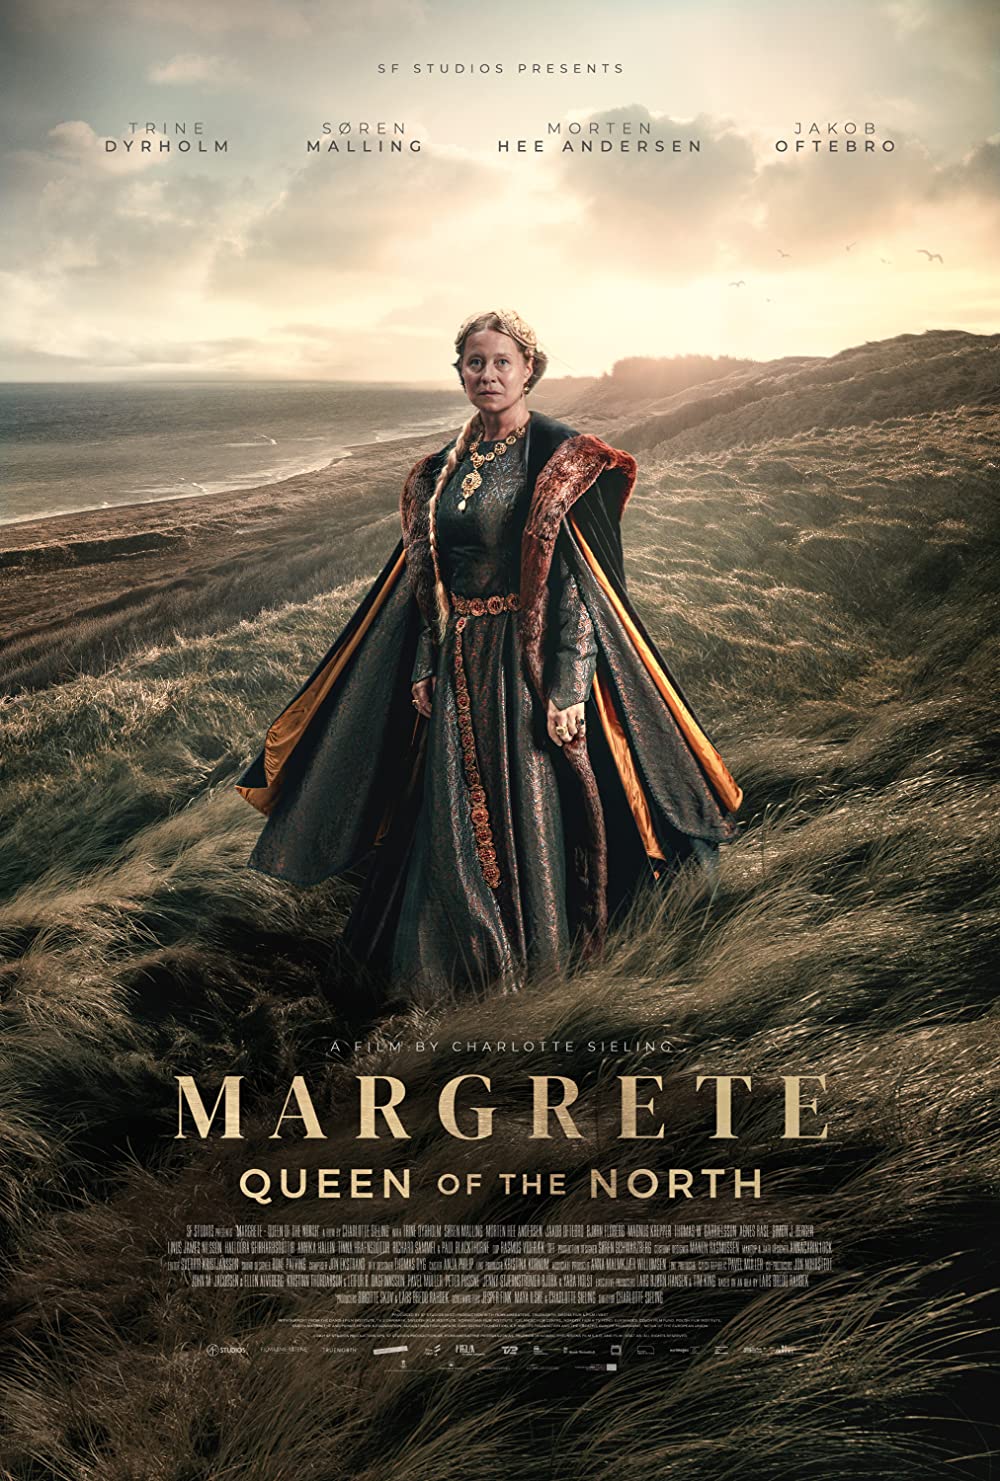 MARGRETE QUEEN OF THE NORTH (2021) 1080p Bluray DTS-HD MA5.1 RETAIL NL Sub